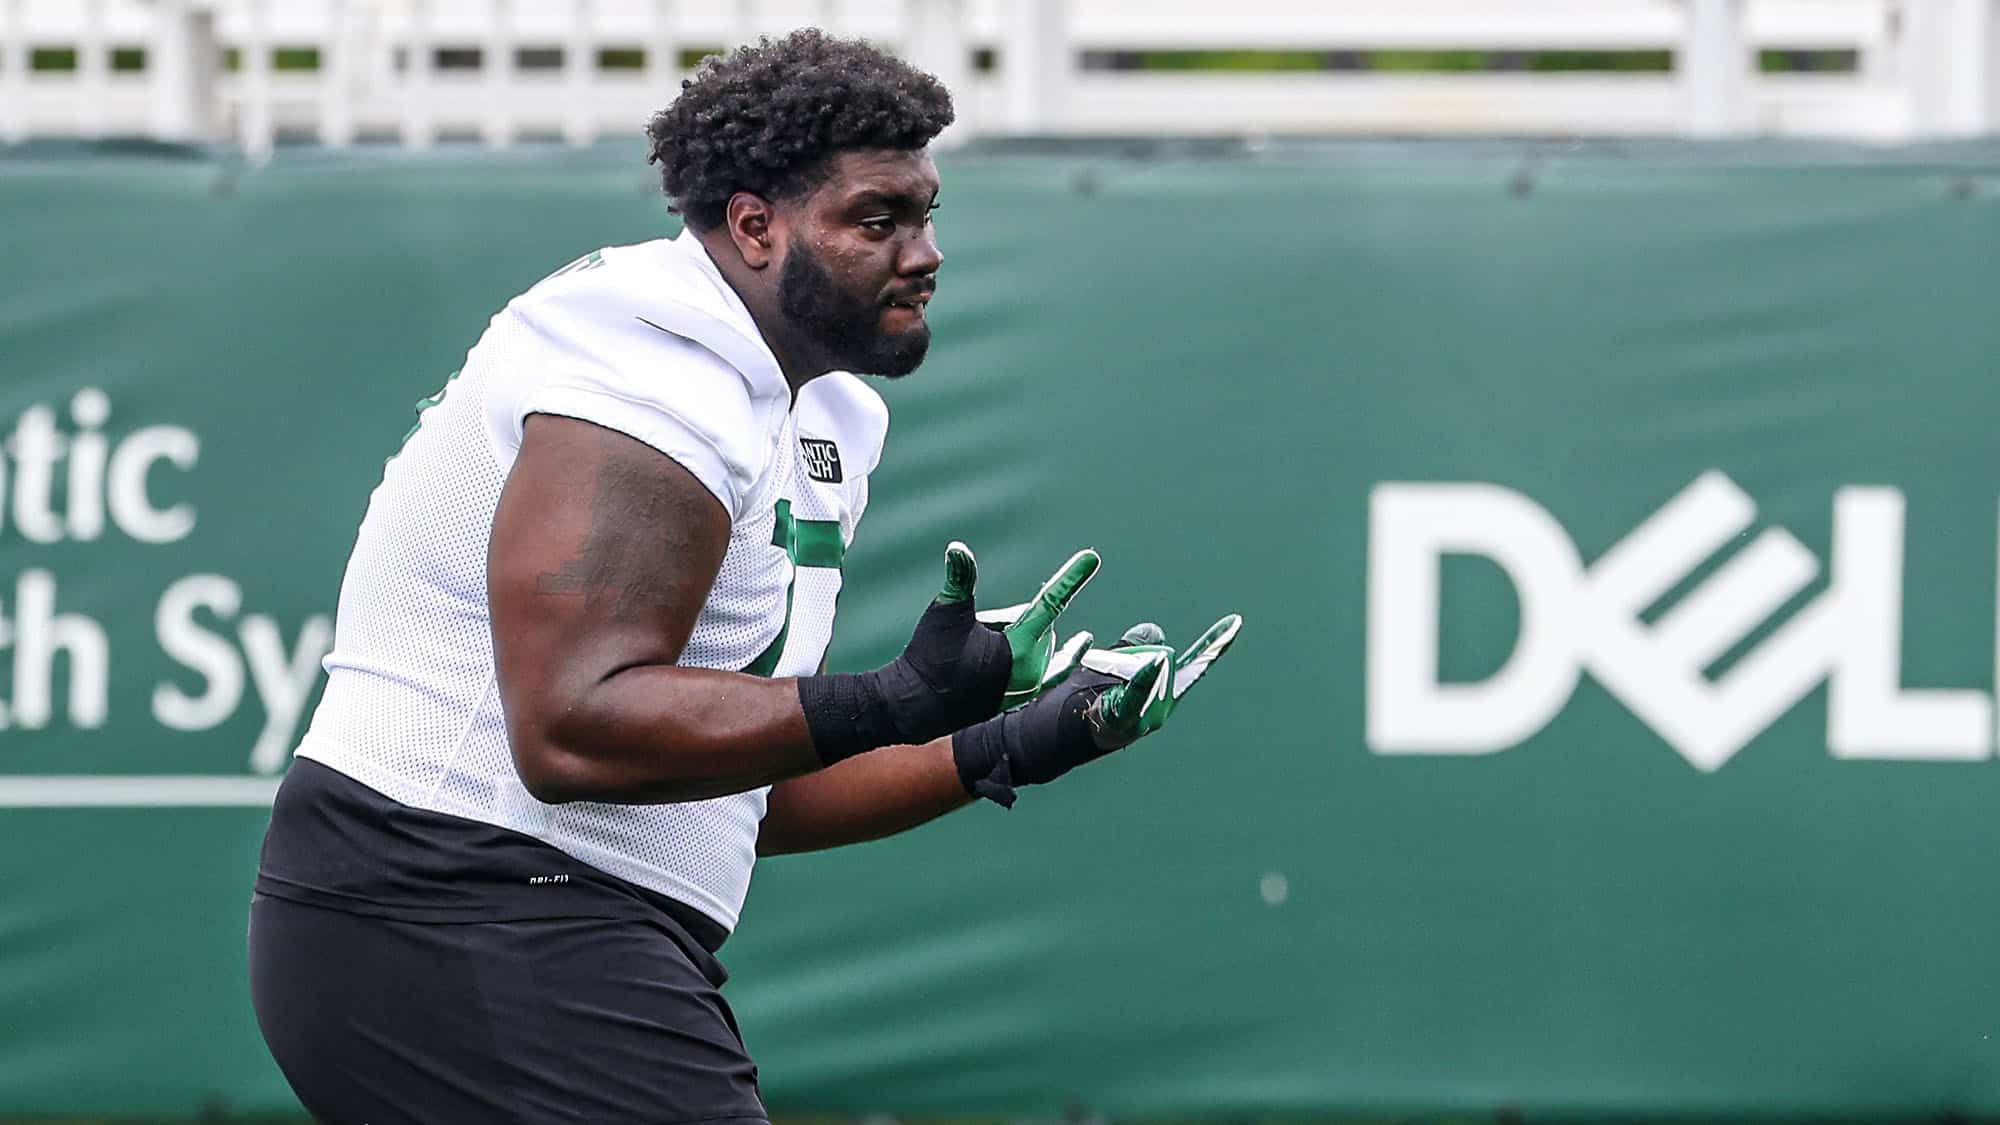 Mekhi Becton's solid stats in the NY Jets' 2021 preseason opener were a promising sign.